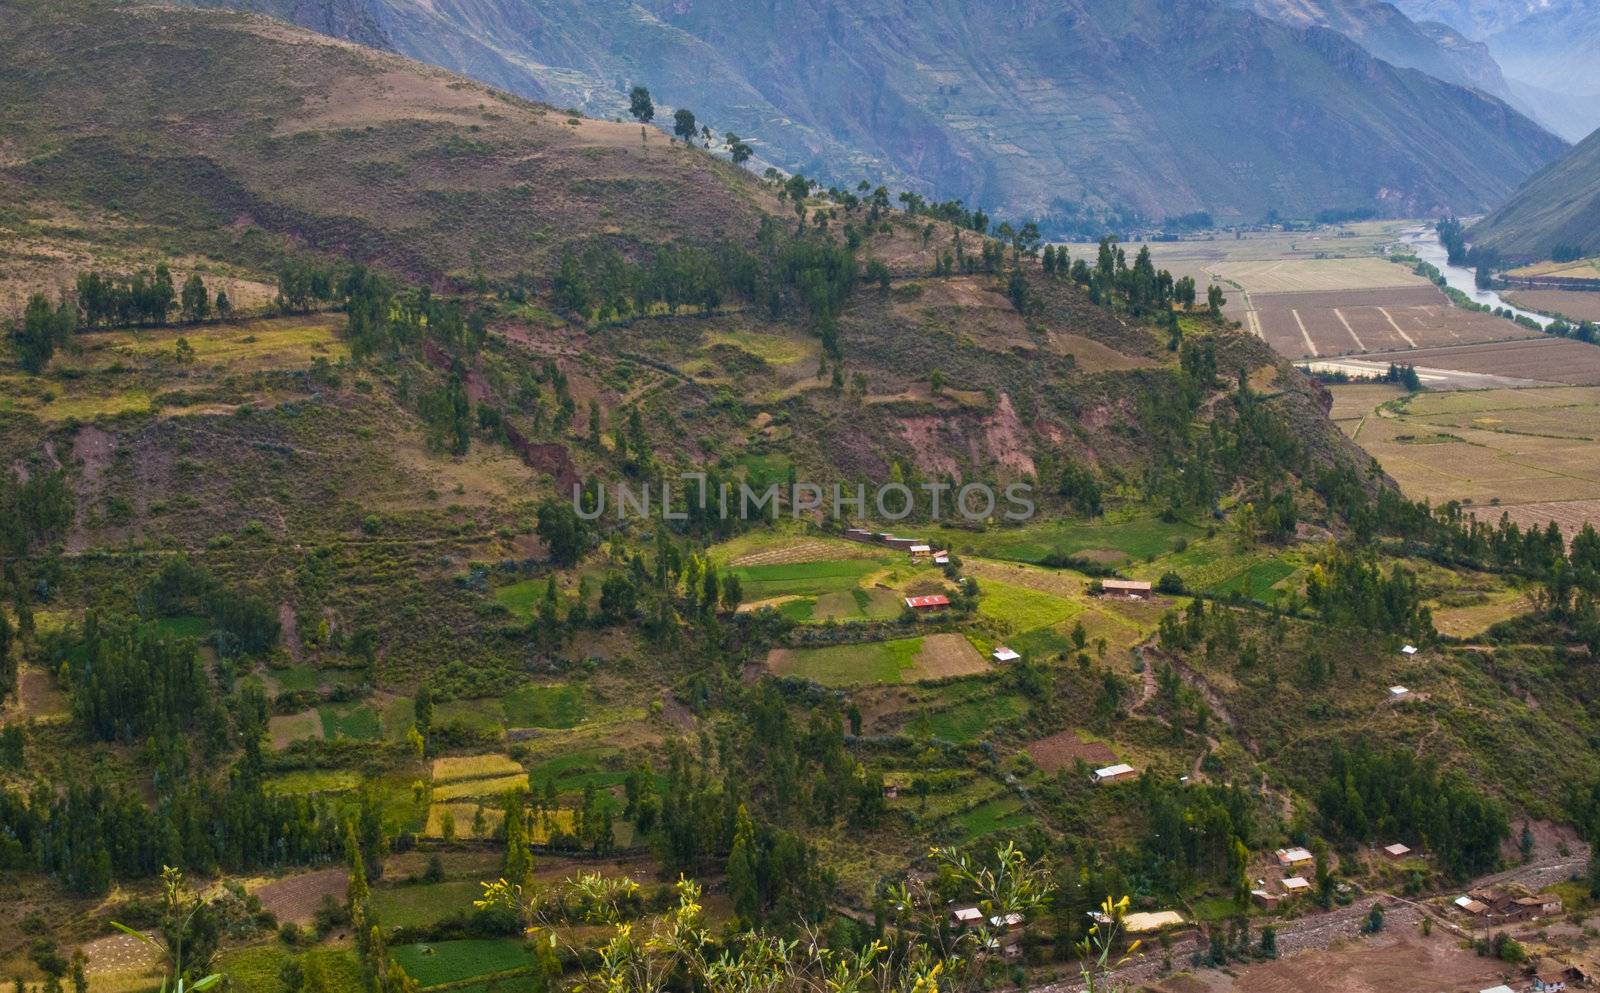 view of the Sacred valley in the Peruvian Andes